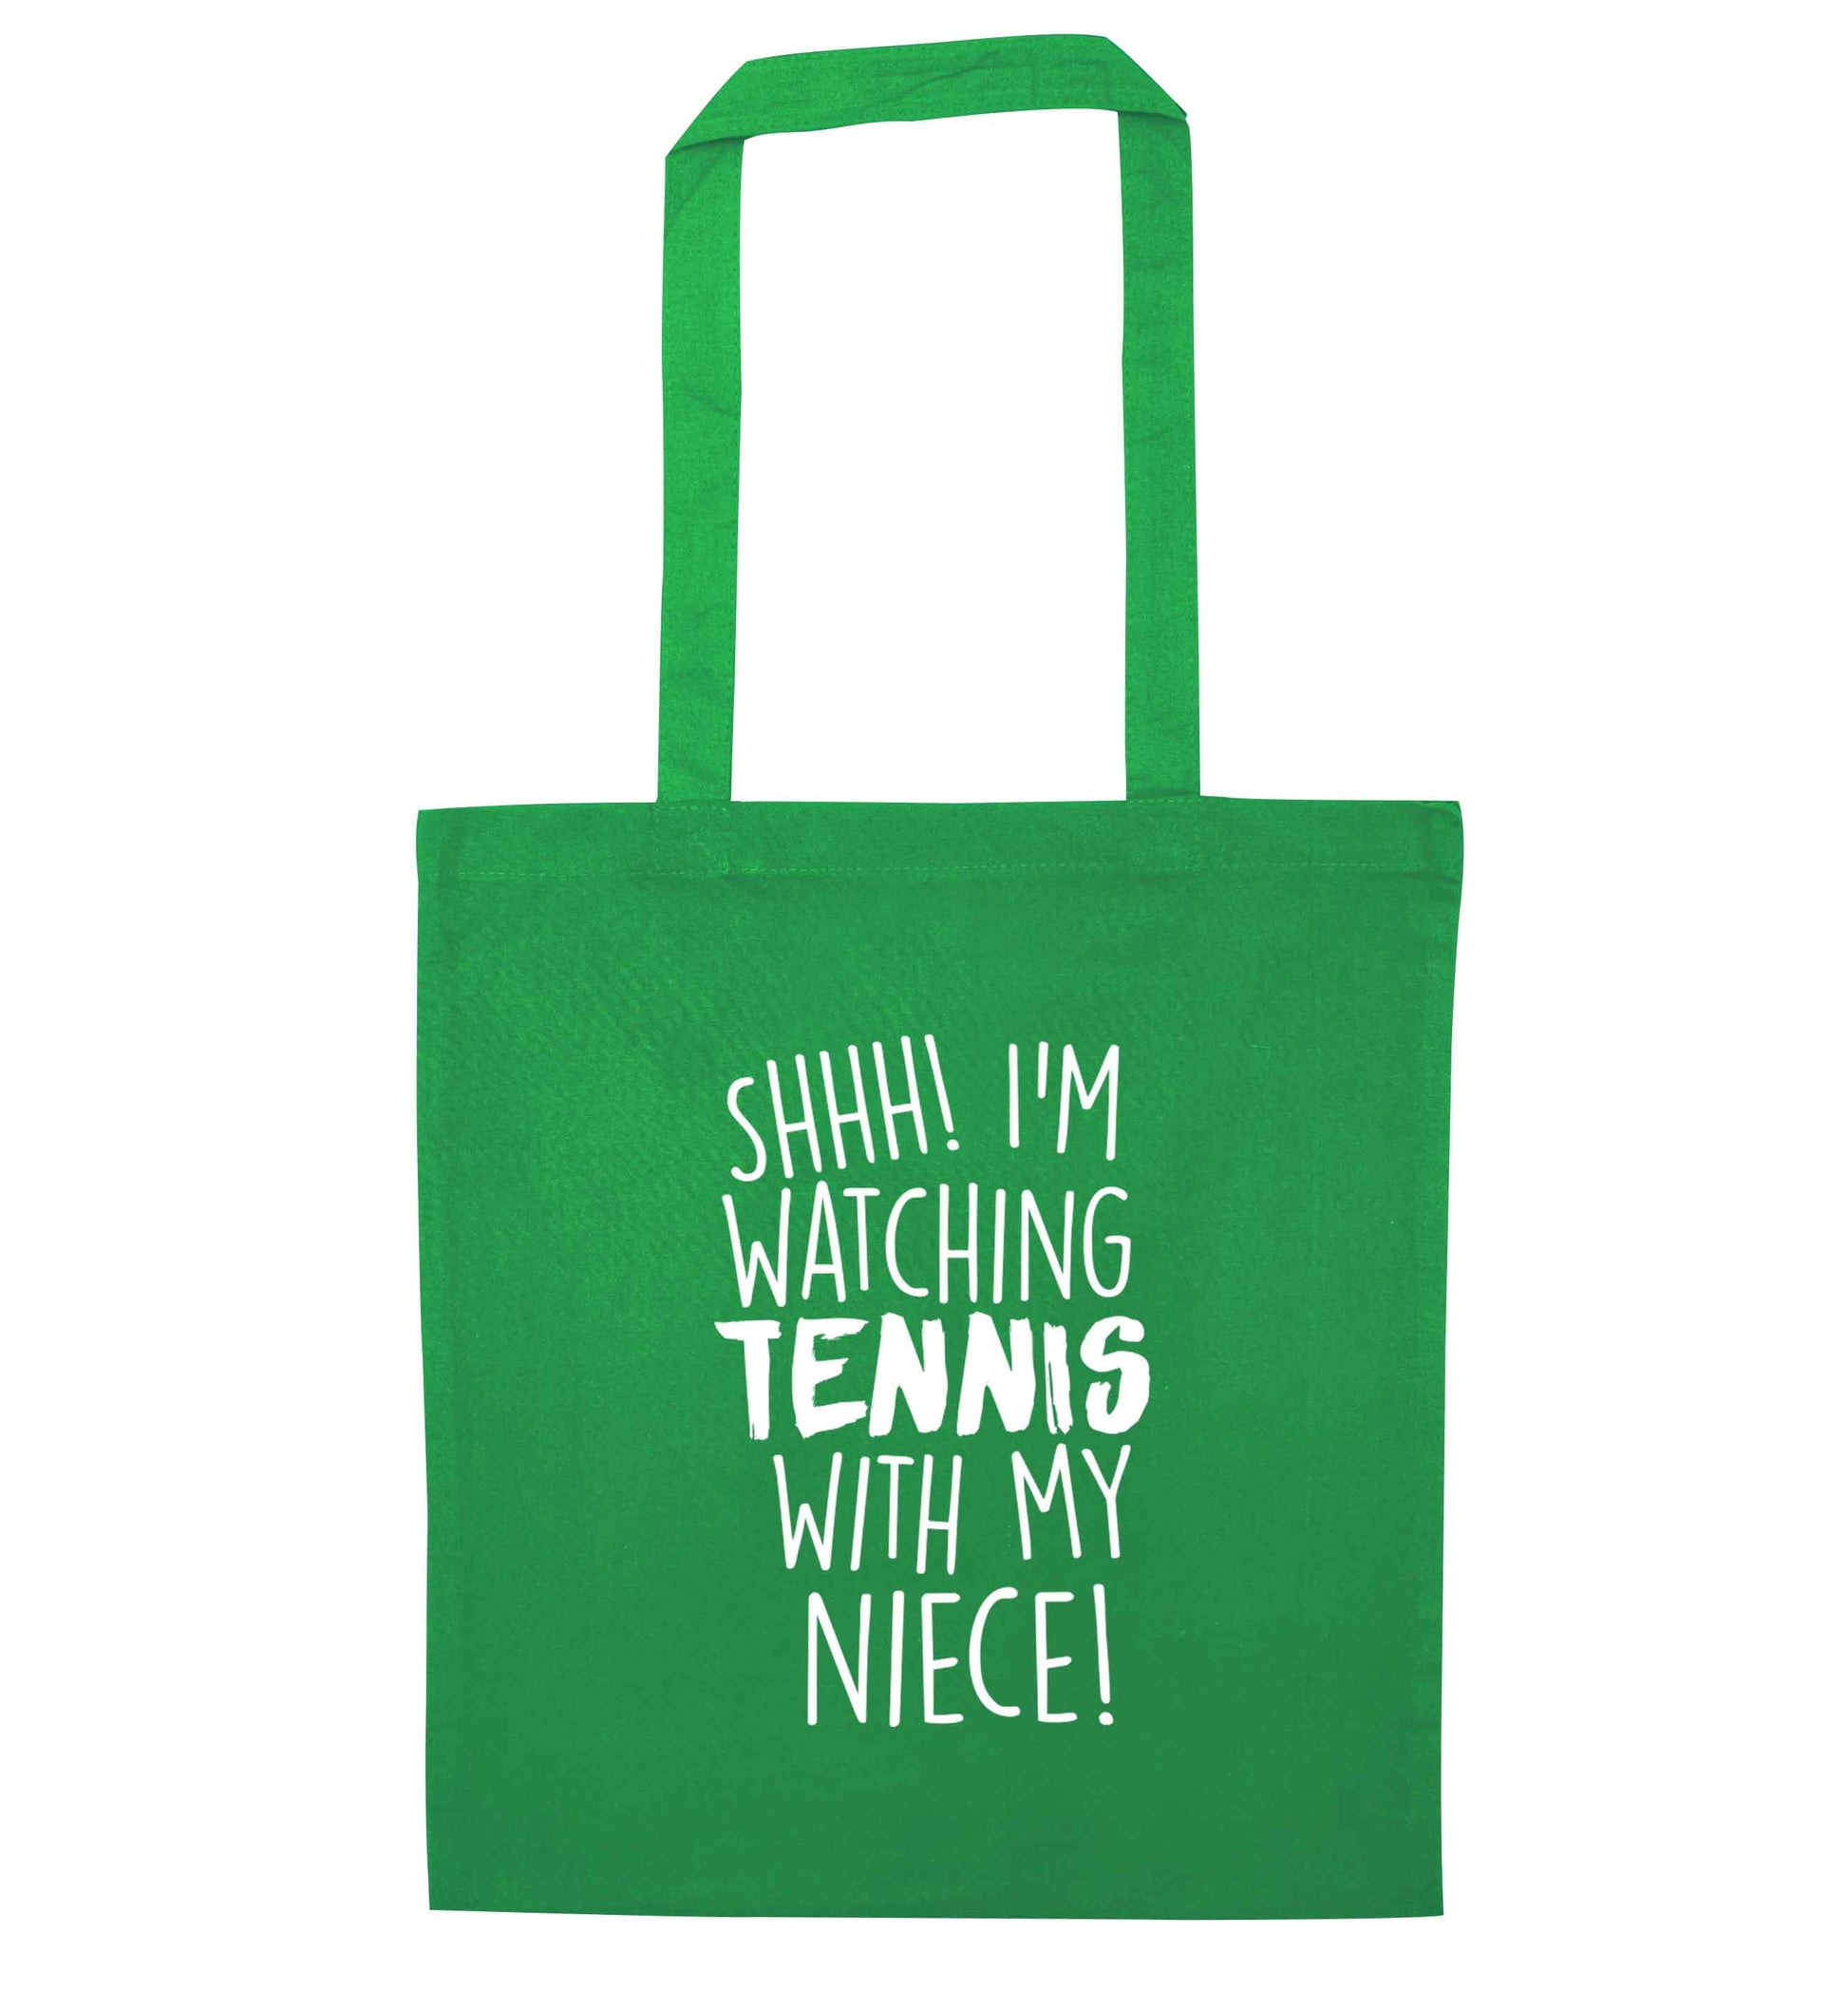 Shh! I'm watching tennis with my niece! green tote bag